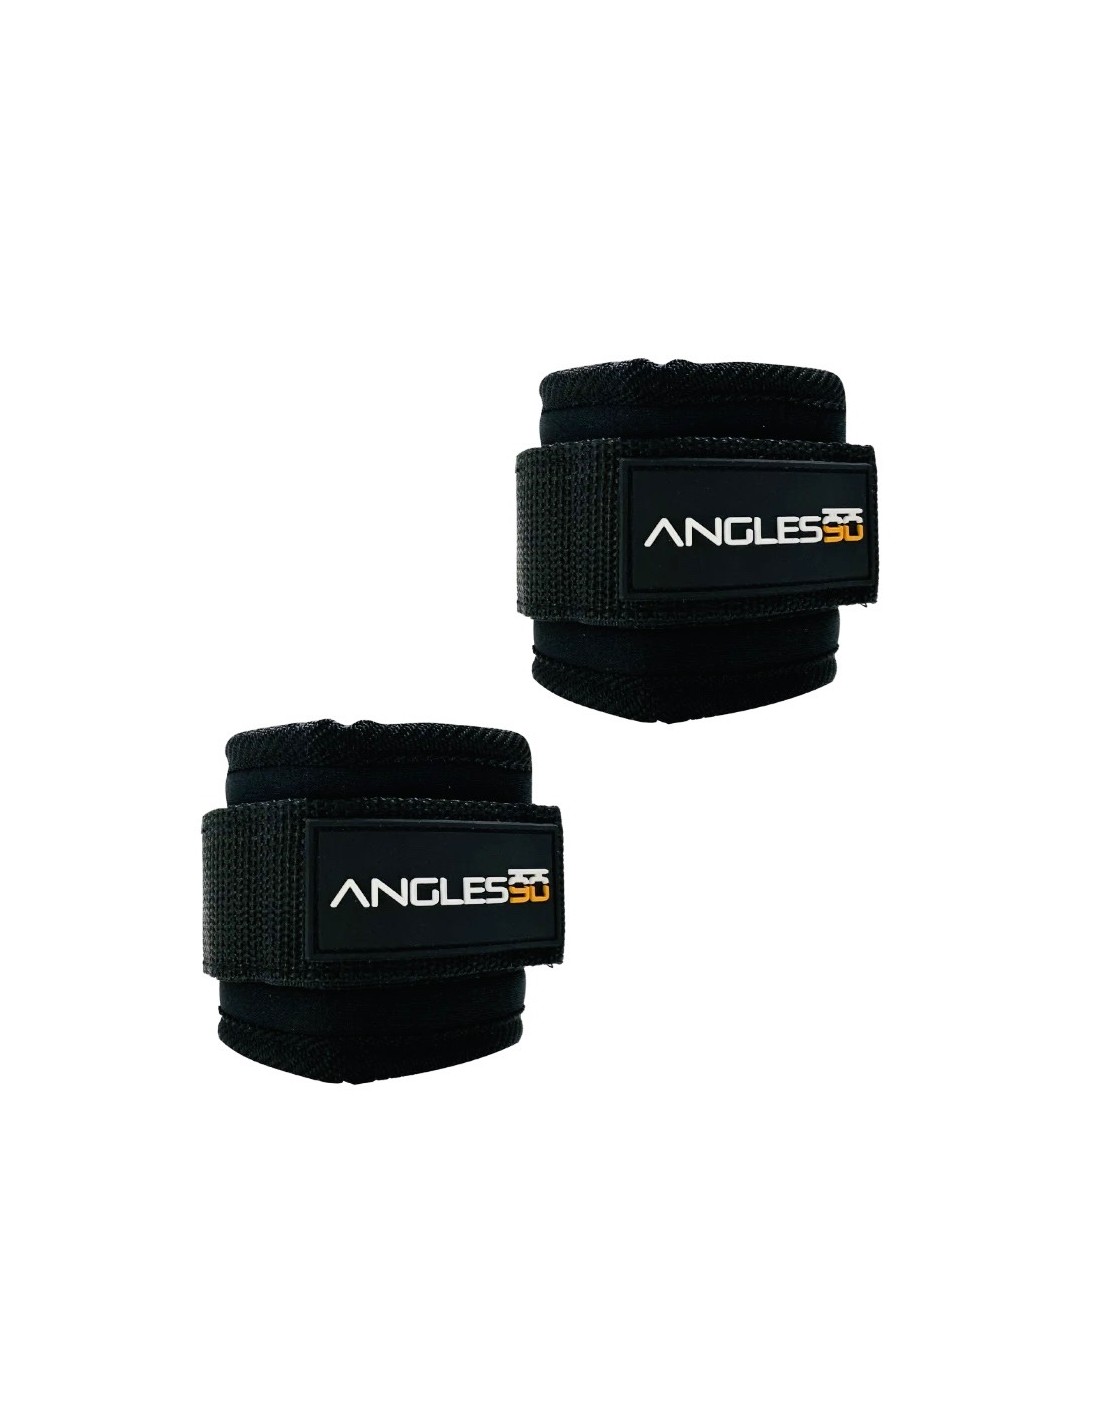 Angles90 Ankle Straps von Angles90